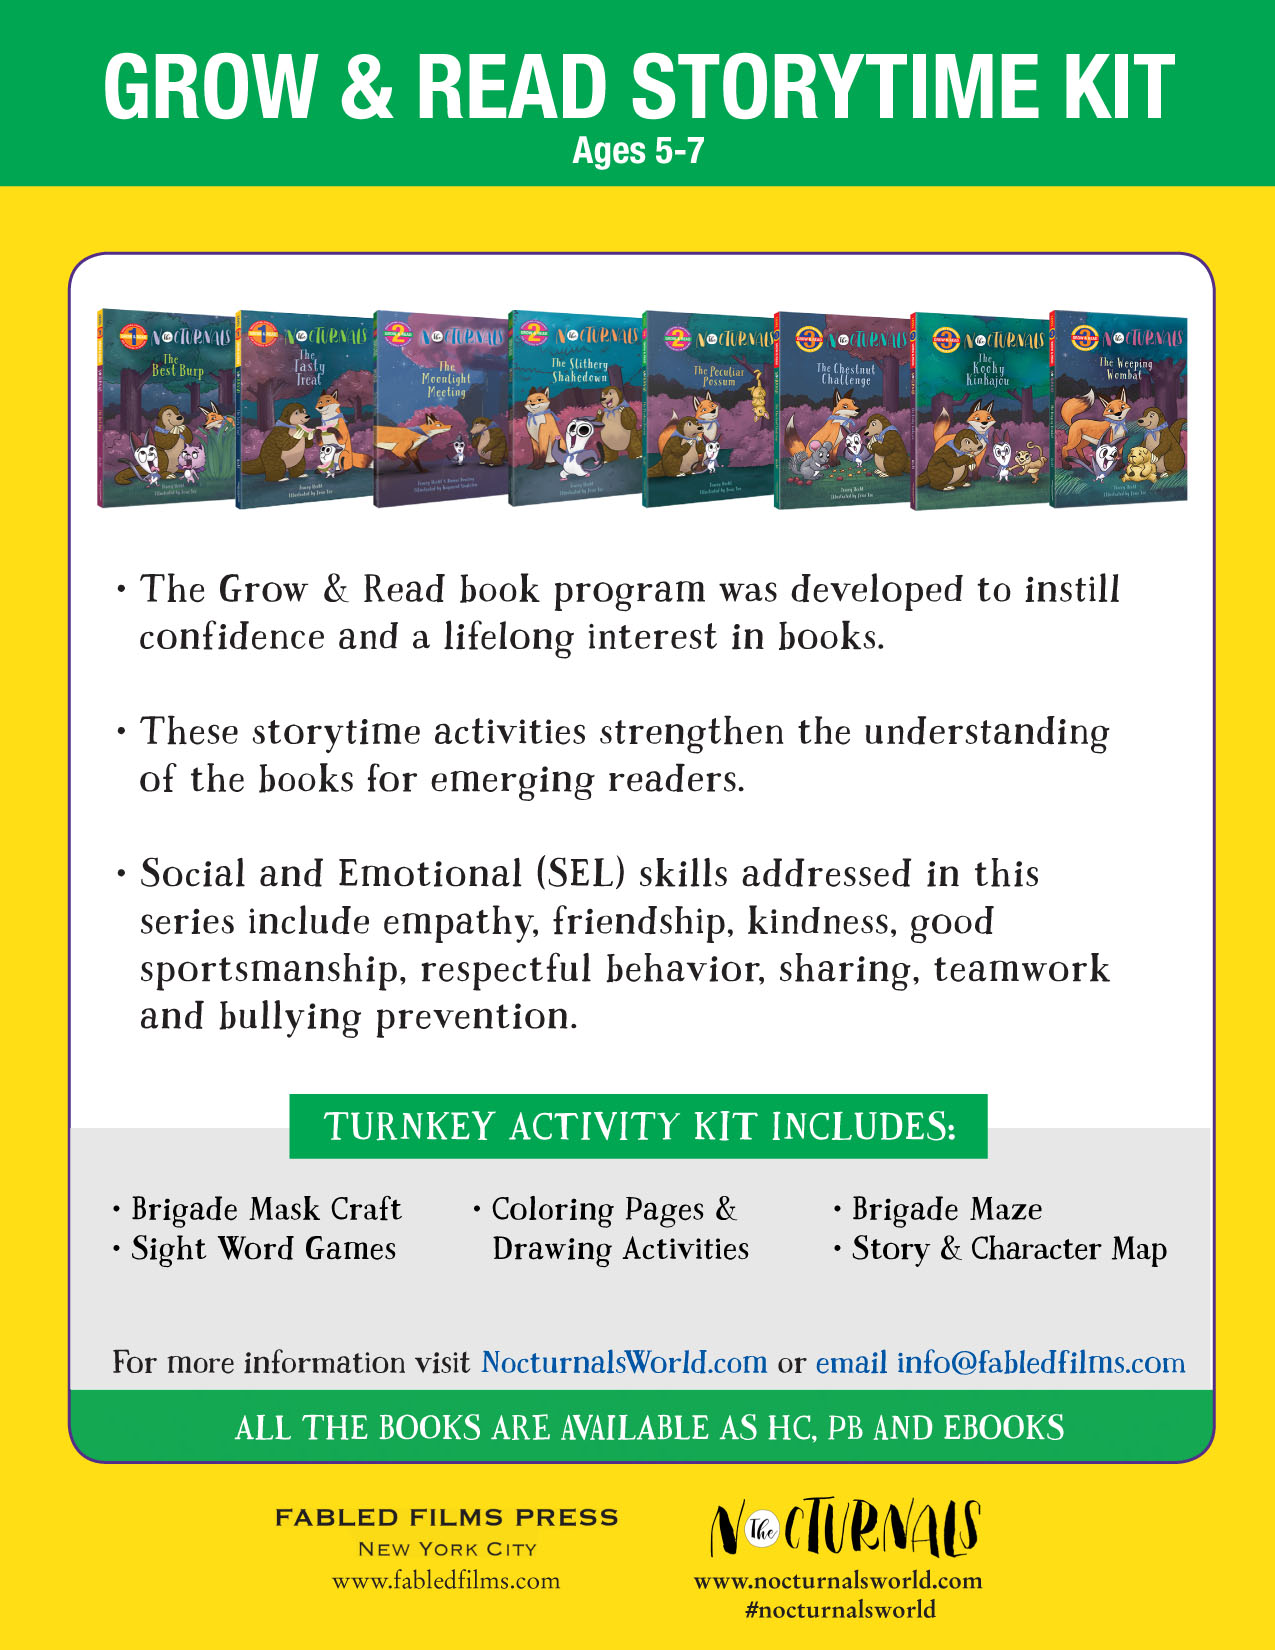 The Nocturnals Grow & Read Storytime Kit strengthens understanding of the books with activities like sight words games, coloring and drawing pages, and story maps